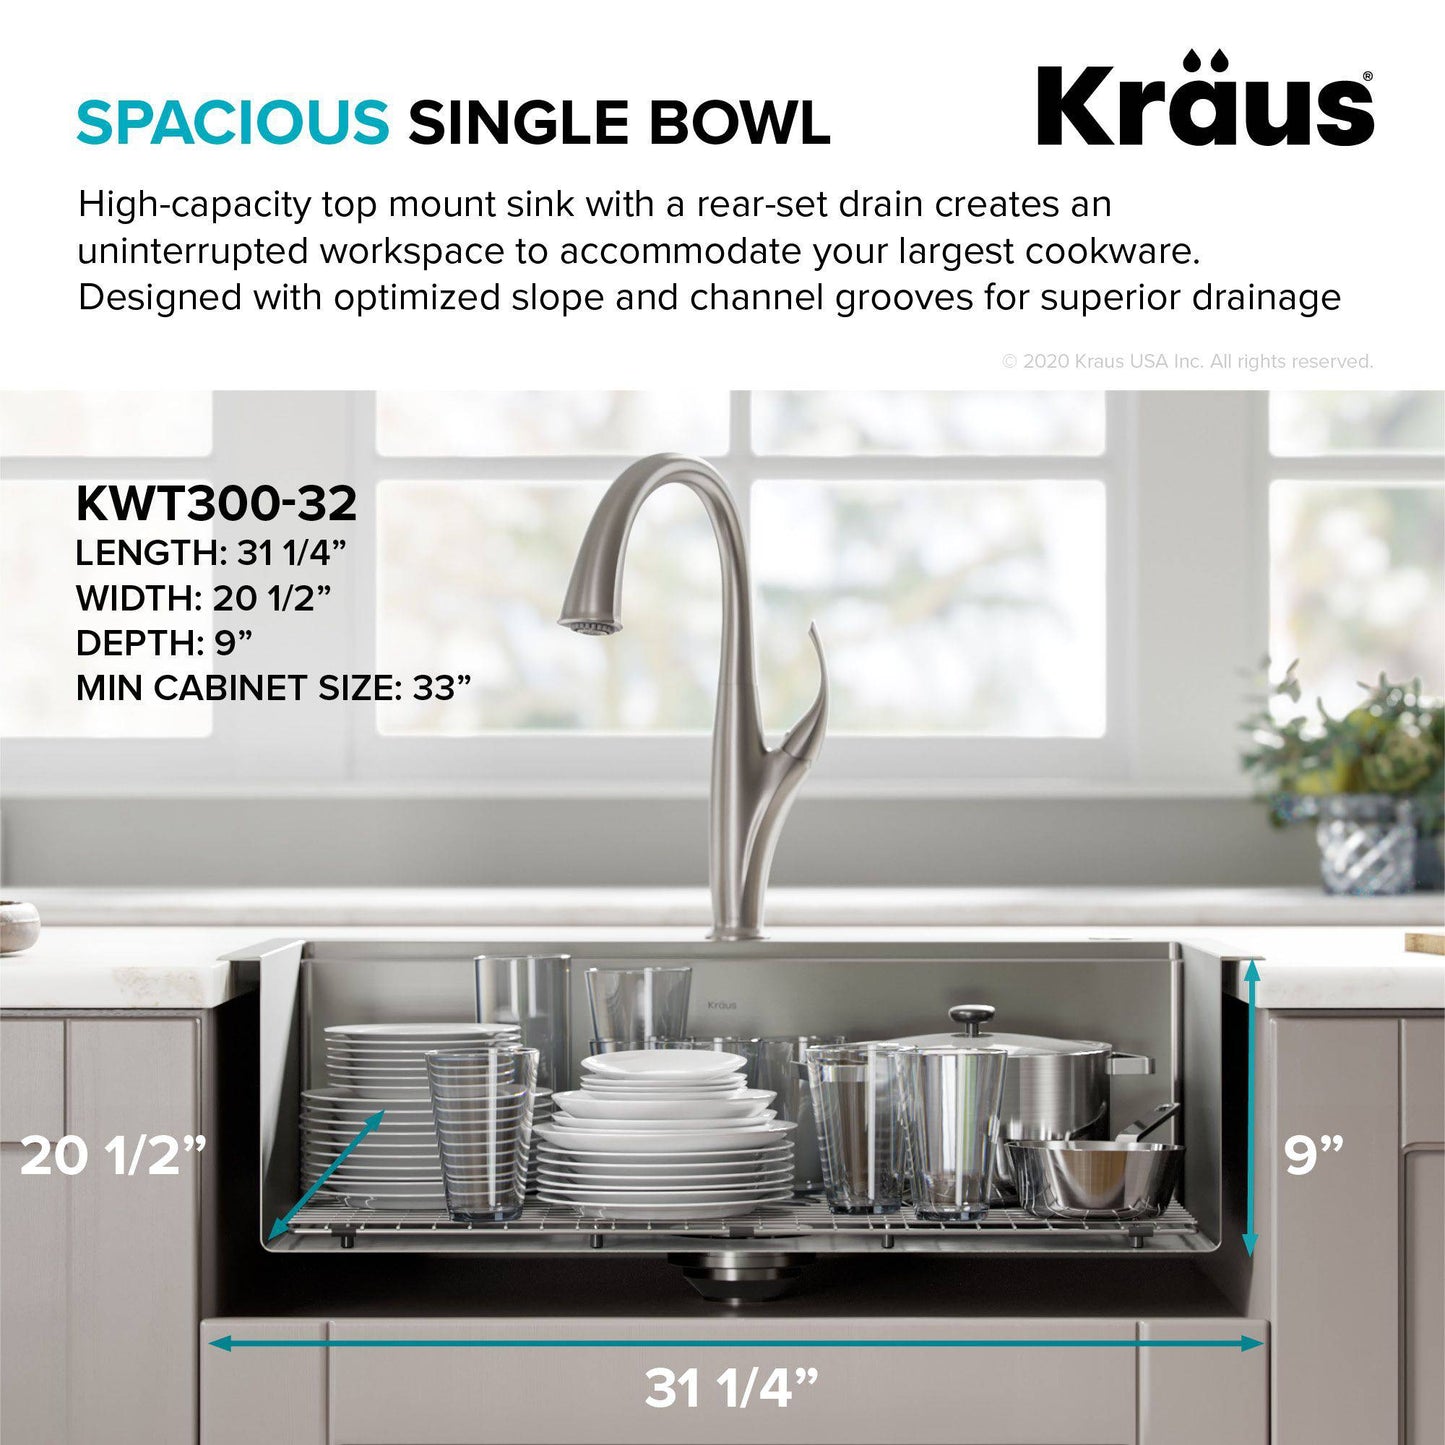 Kraus Kore Workstation 31.25" x 20.5 Drop-In Single Bowl Stainless Steel Kitchen Sink with Accessories